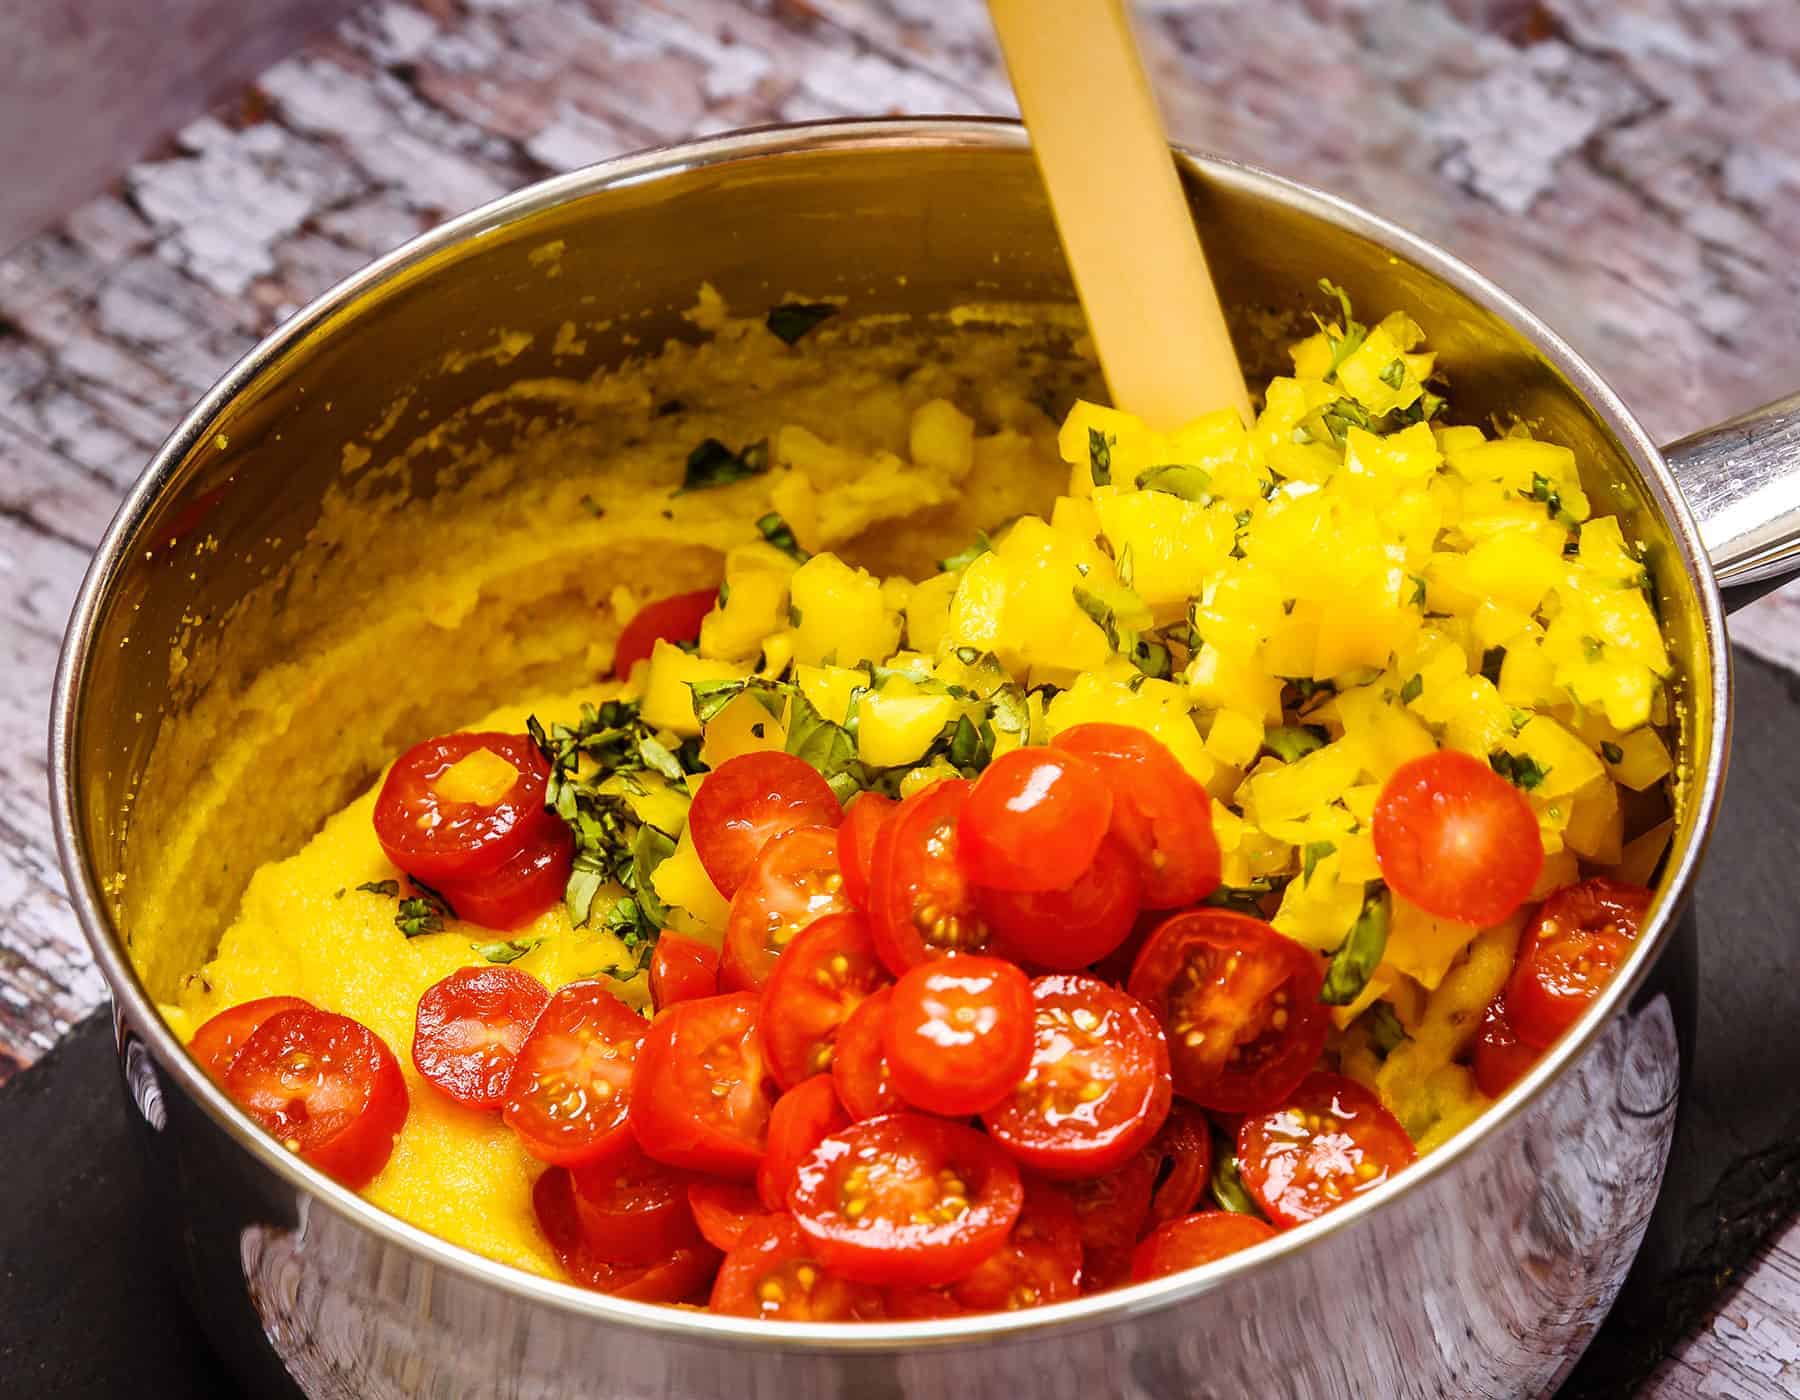 Adding Tomatoes and Yellow Pepper to Polenta Mixture